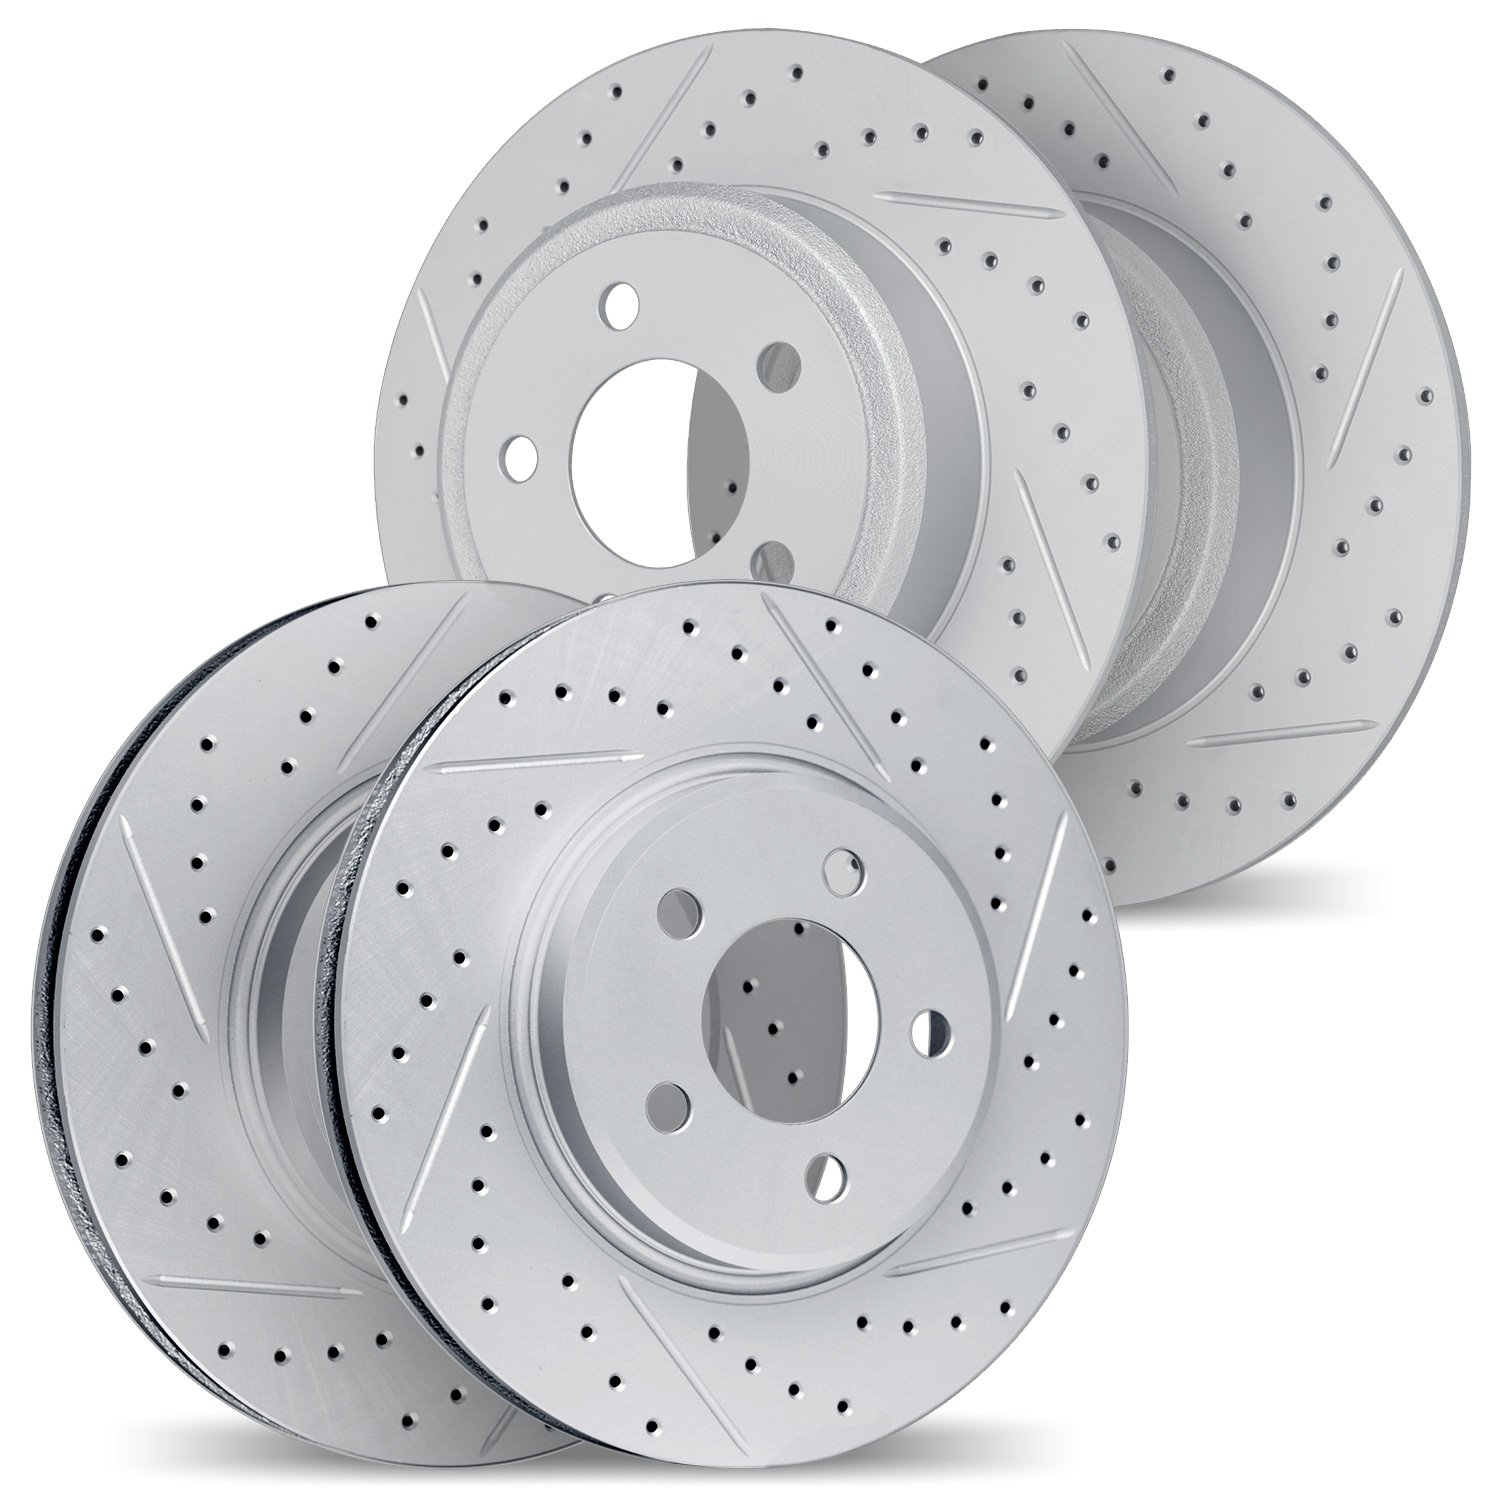 2004-54065 Geoperformance Drilled/Slotted Brake Rotors, 1995-2001 Ford/Lincoln/Mercury/Mazda, Position: Front and Rear